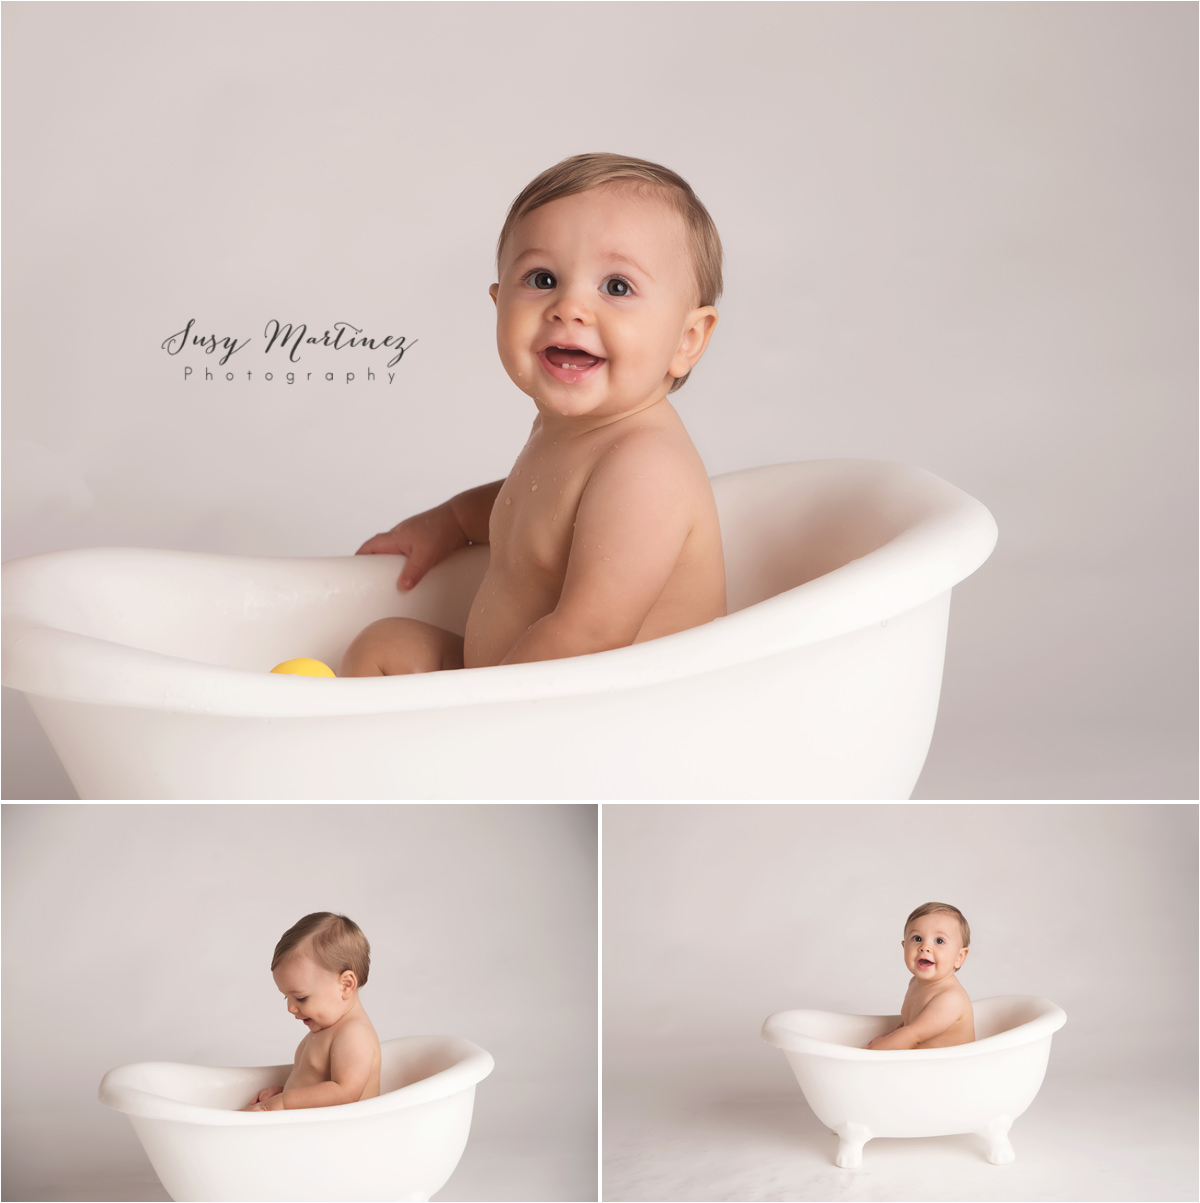 Las Vegas baby photographer Susy Martinez Photography captures birthday baby in tub after cake smash